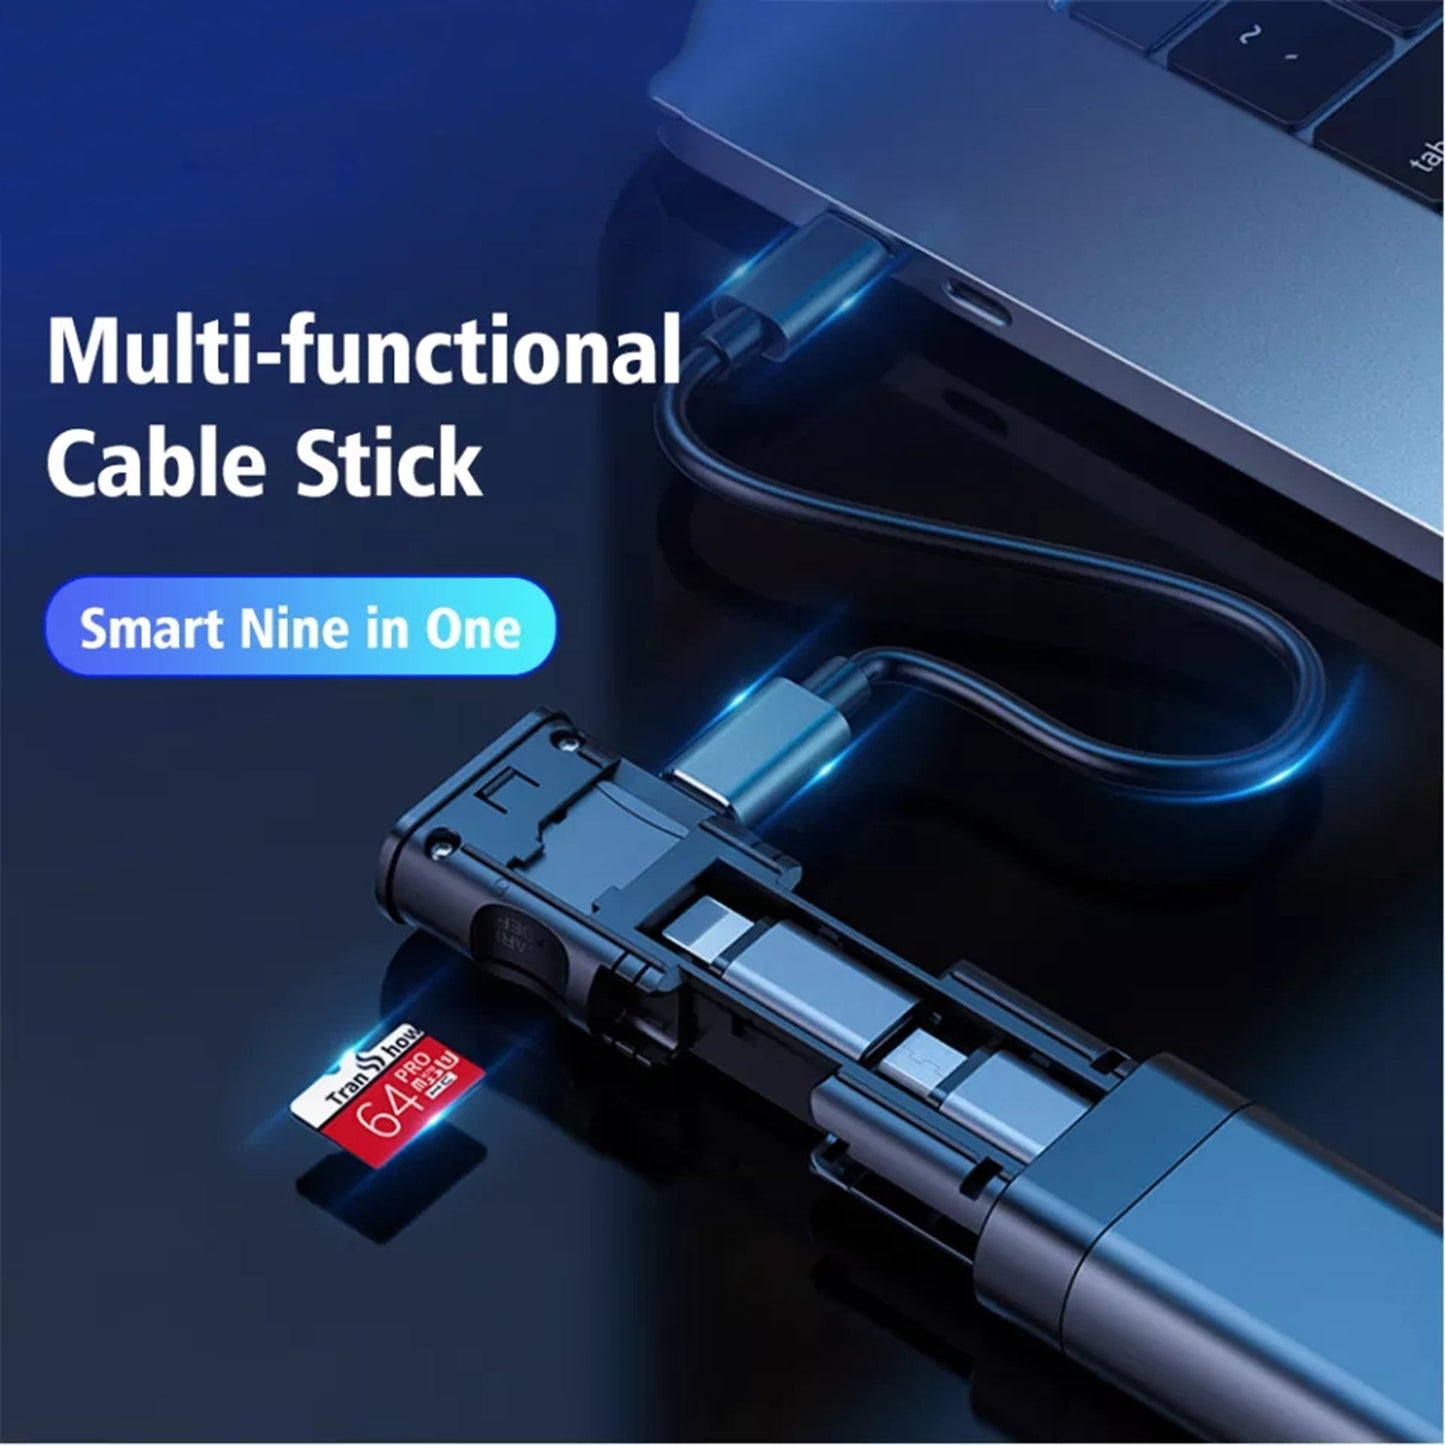 9 in 1 Cable Stick - HOW DO I BUY THIS Black